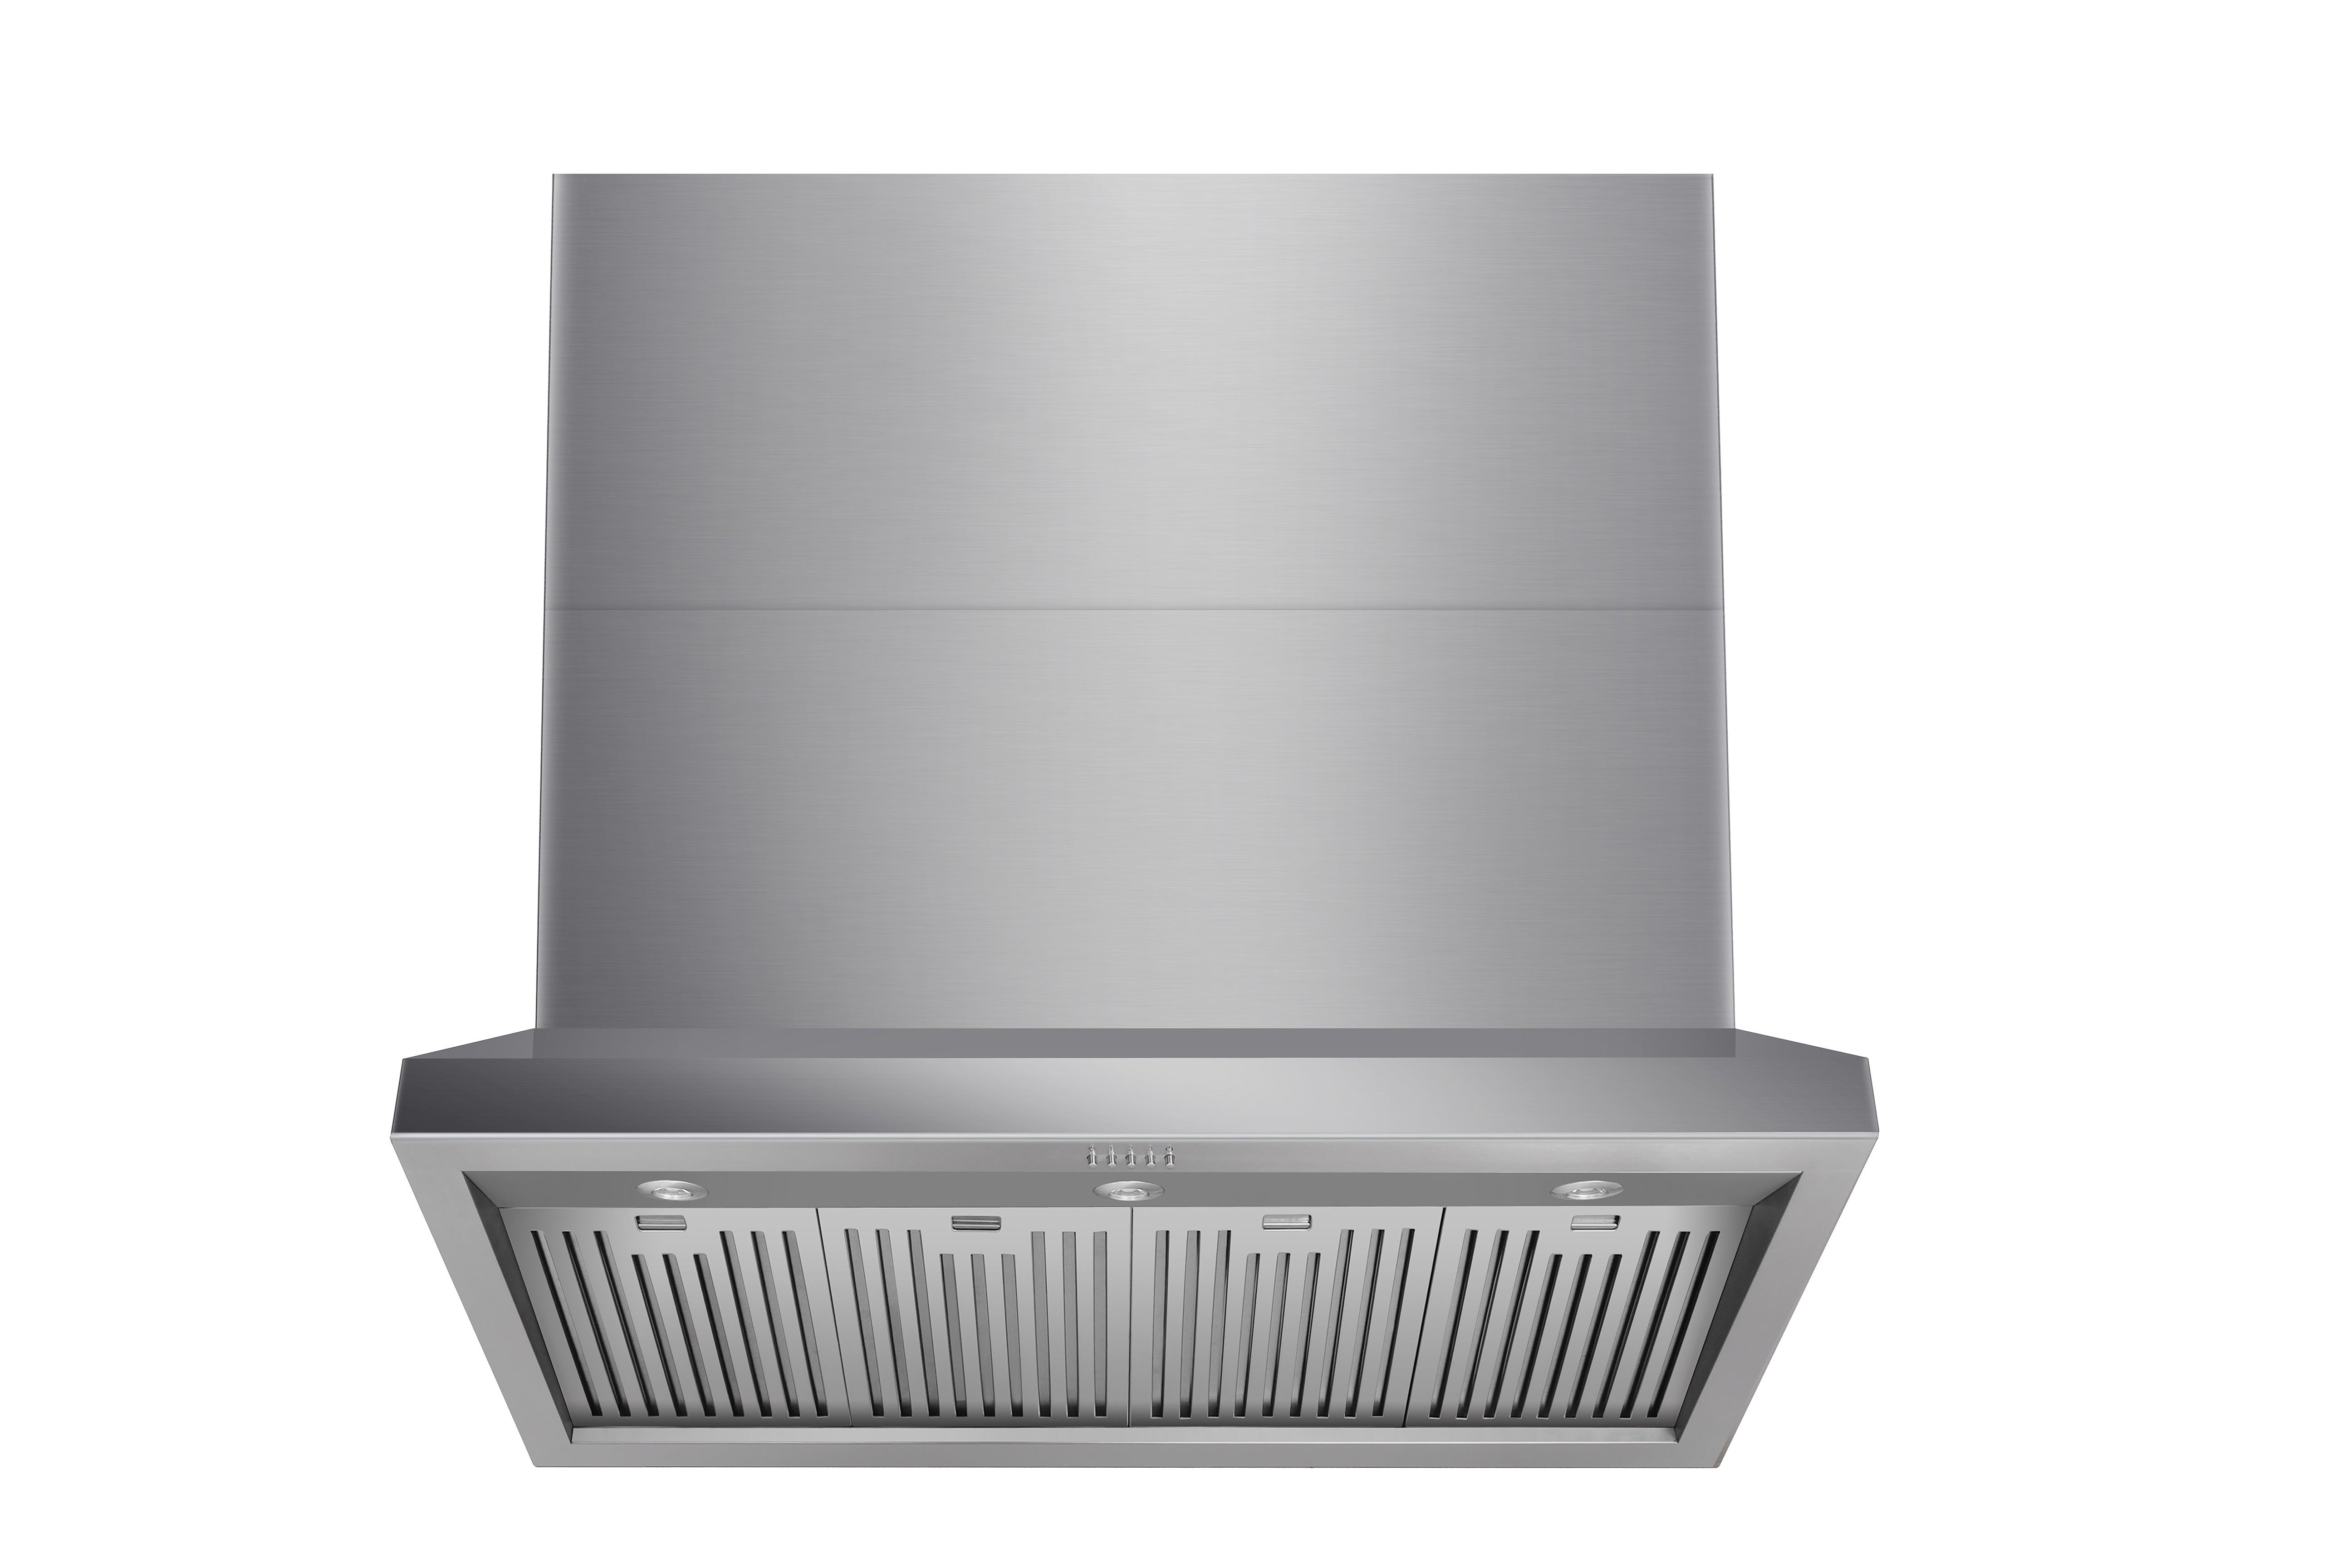 TRH4806-R (Renewed) Thor Kitchen 48 Inch Professional Range Hood, 11 Inches Tall in Stainless Steel